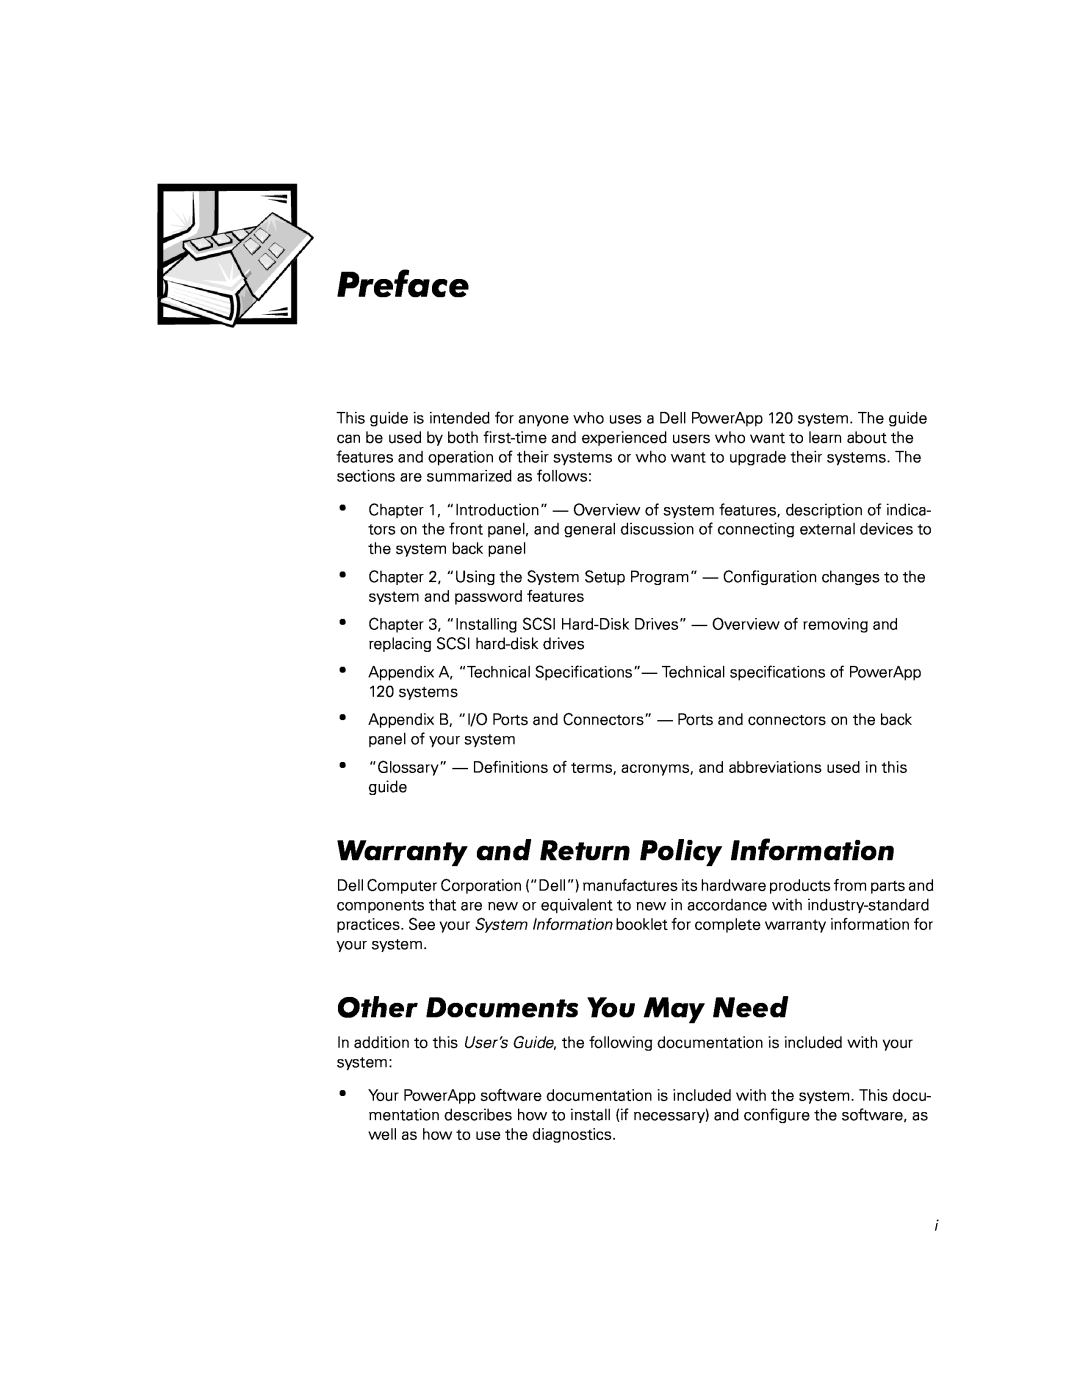 Dell 120 warranty Warranty and Return Policy Information, Other Documents You May Need, Preface 